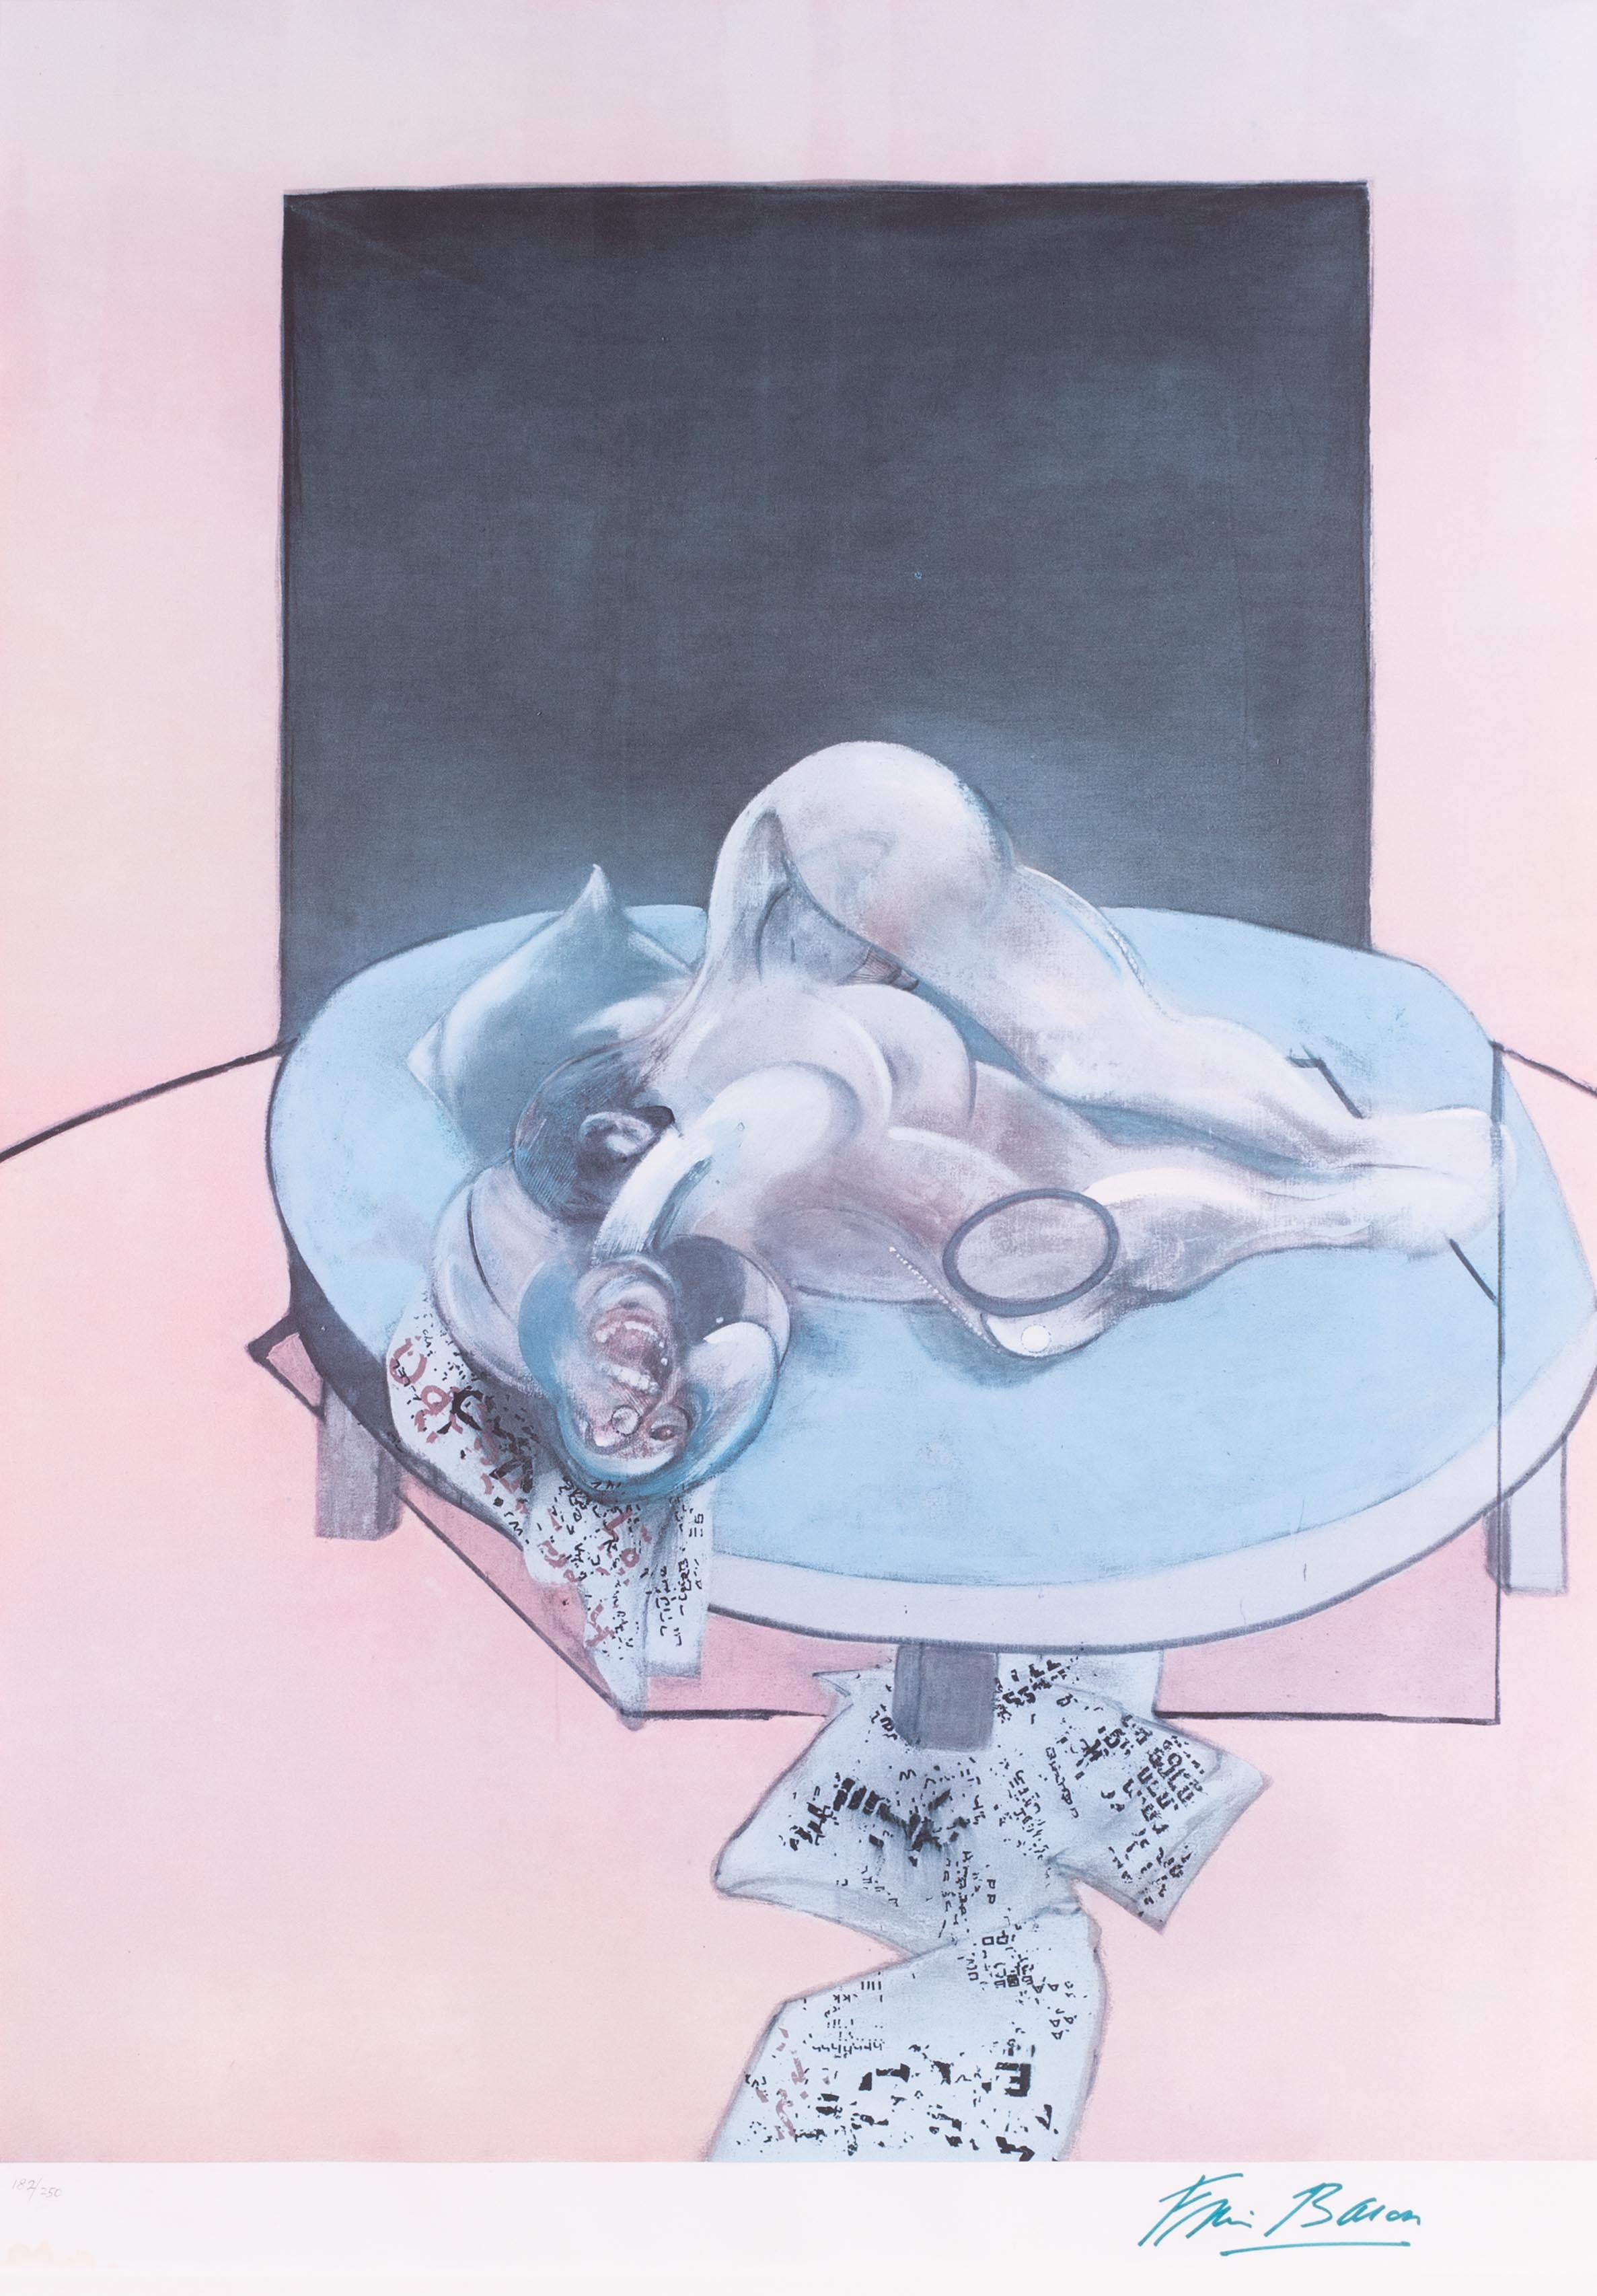 Francis Bacon, signed 182/250 offset lithograph, study of the human body, 1980 For Sale 1